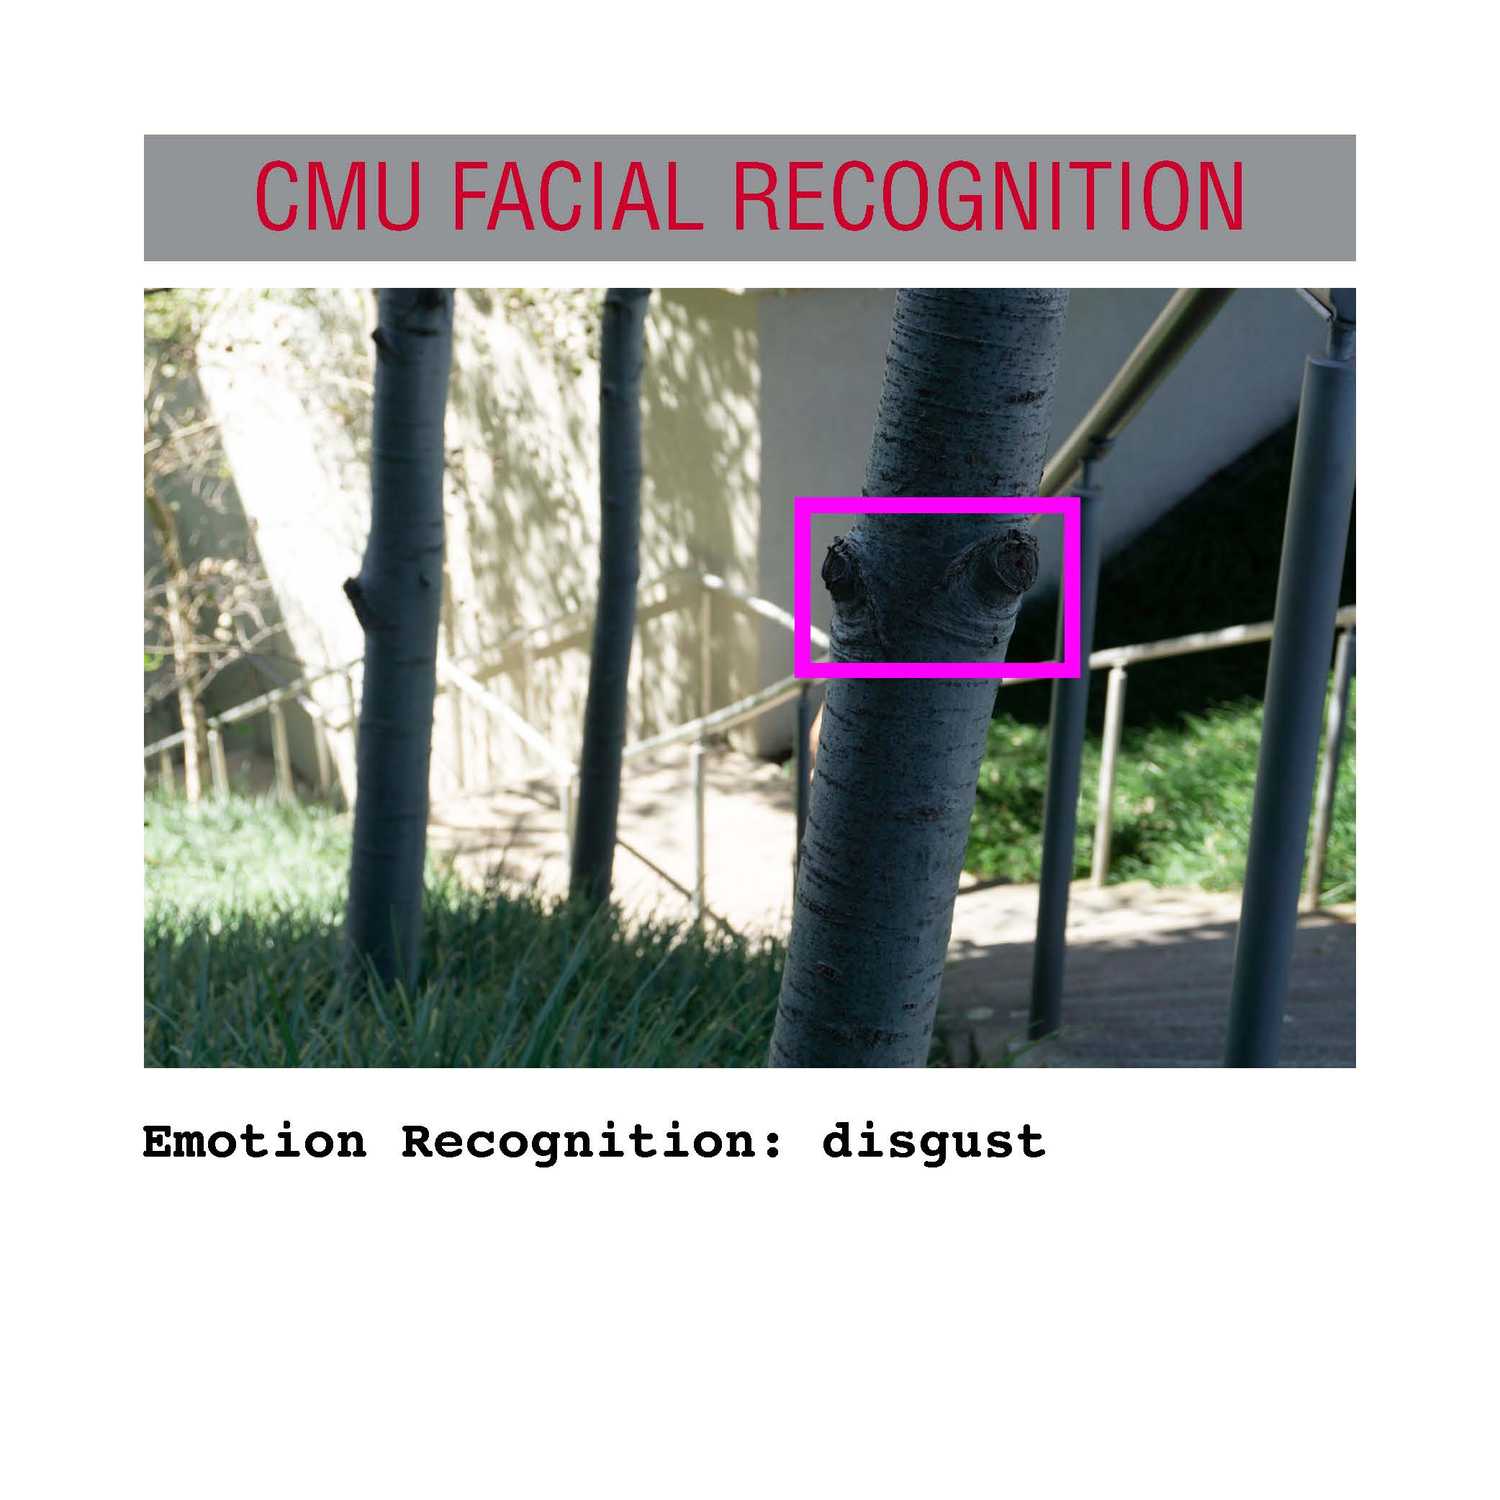 facial recognition Page 02